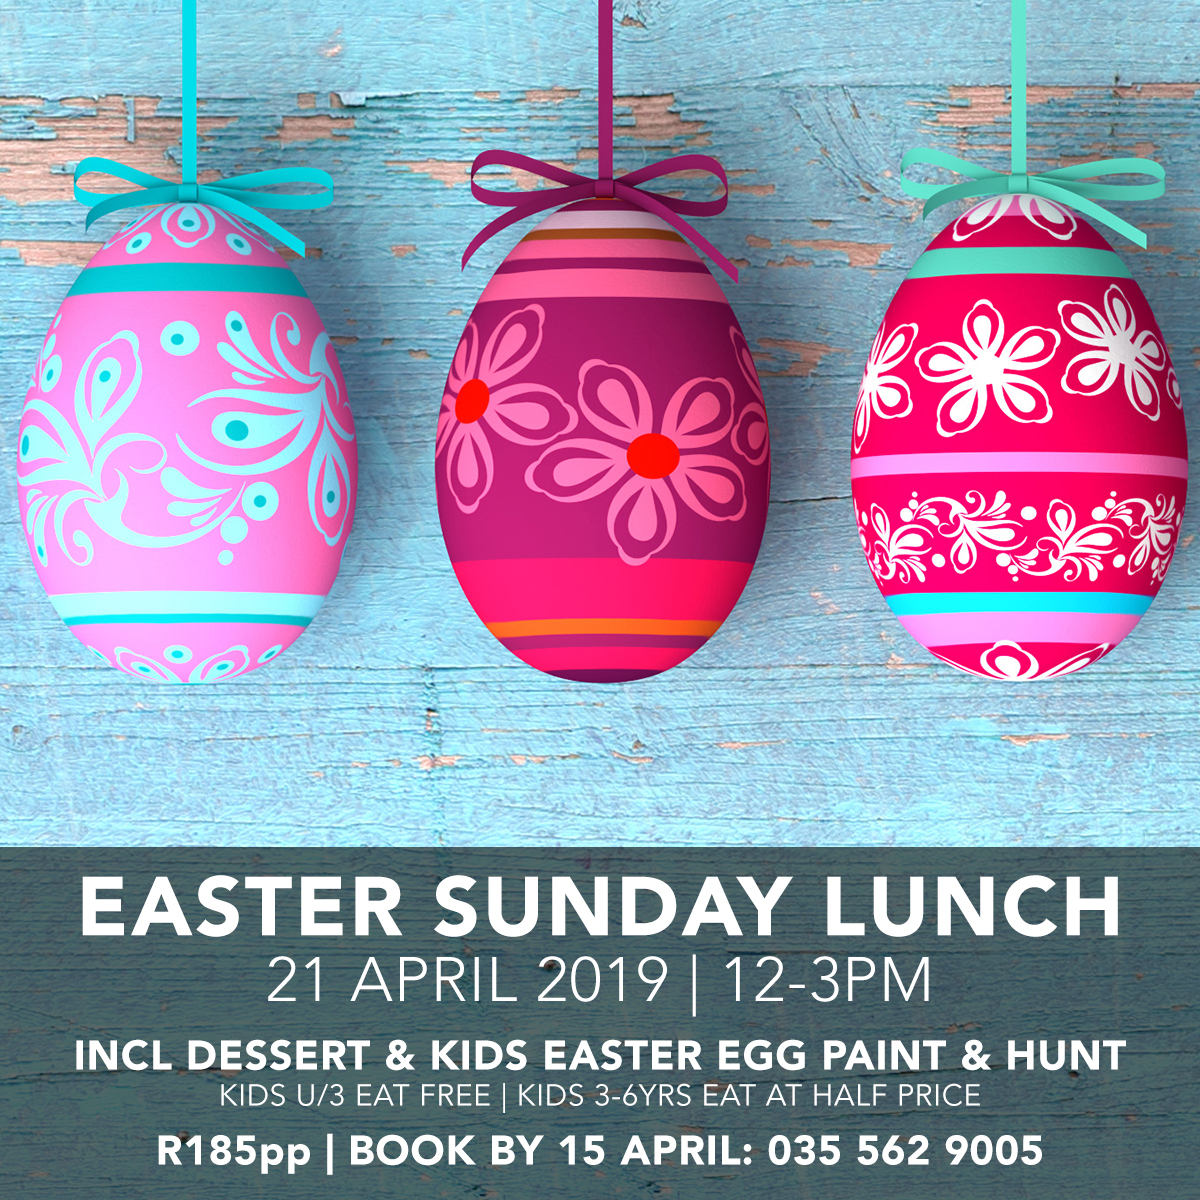 Easter Sunday lunch 21 April 2019 12-3pm